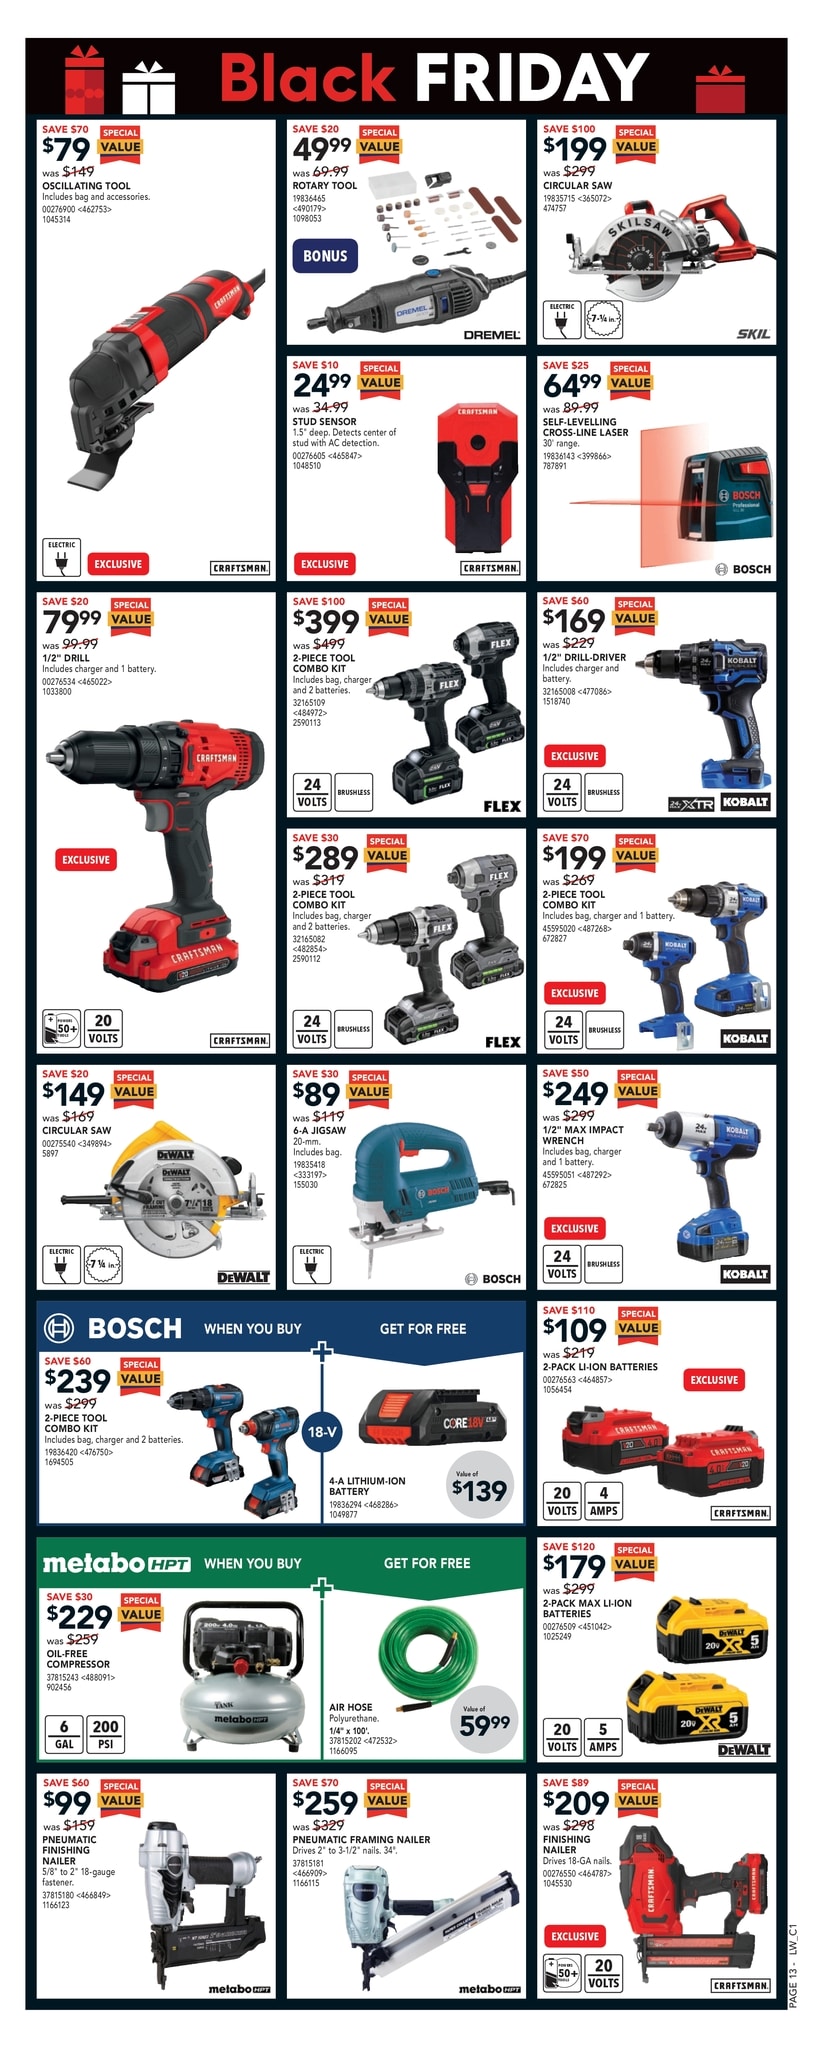 LOWE'S - Weekly Flyer Specials - Black Friday - Page 12